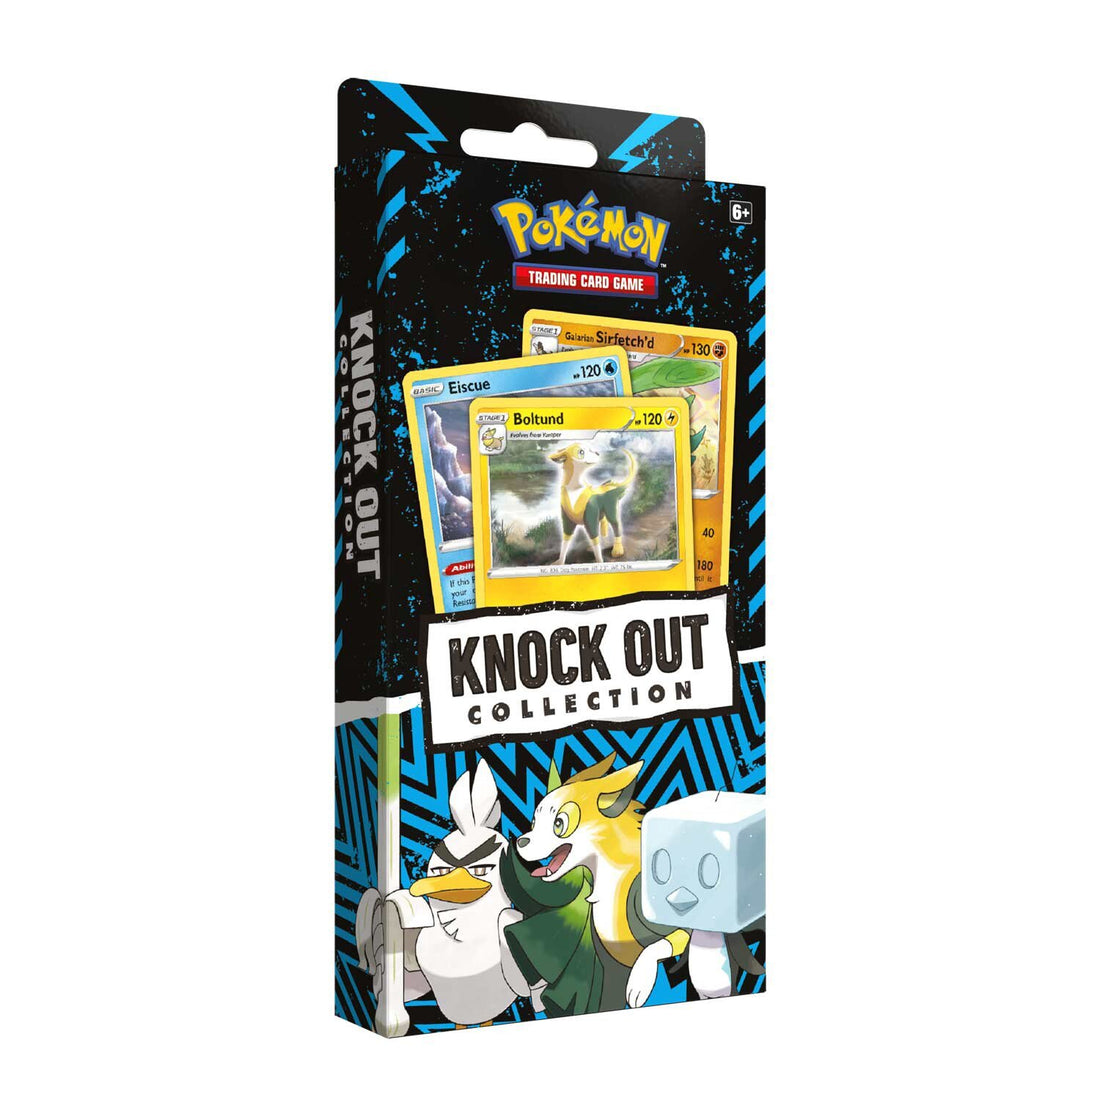 Pokémon TCG: Knock Out Collection - Boltund/Eiscue/Galarian Sirfetch'd